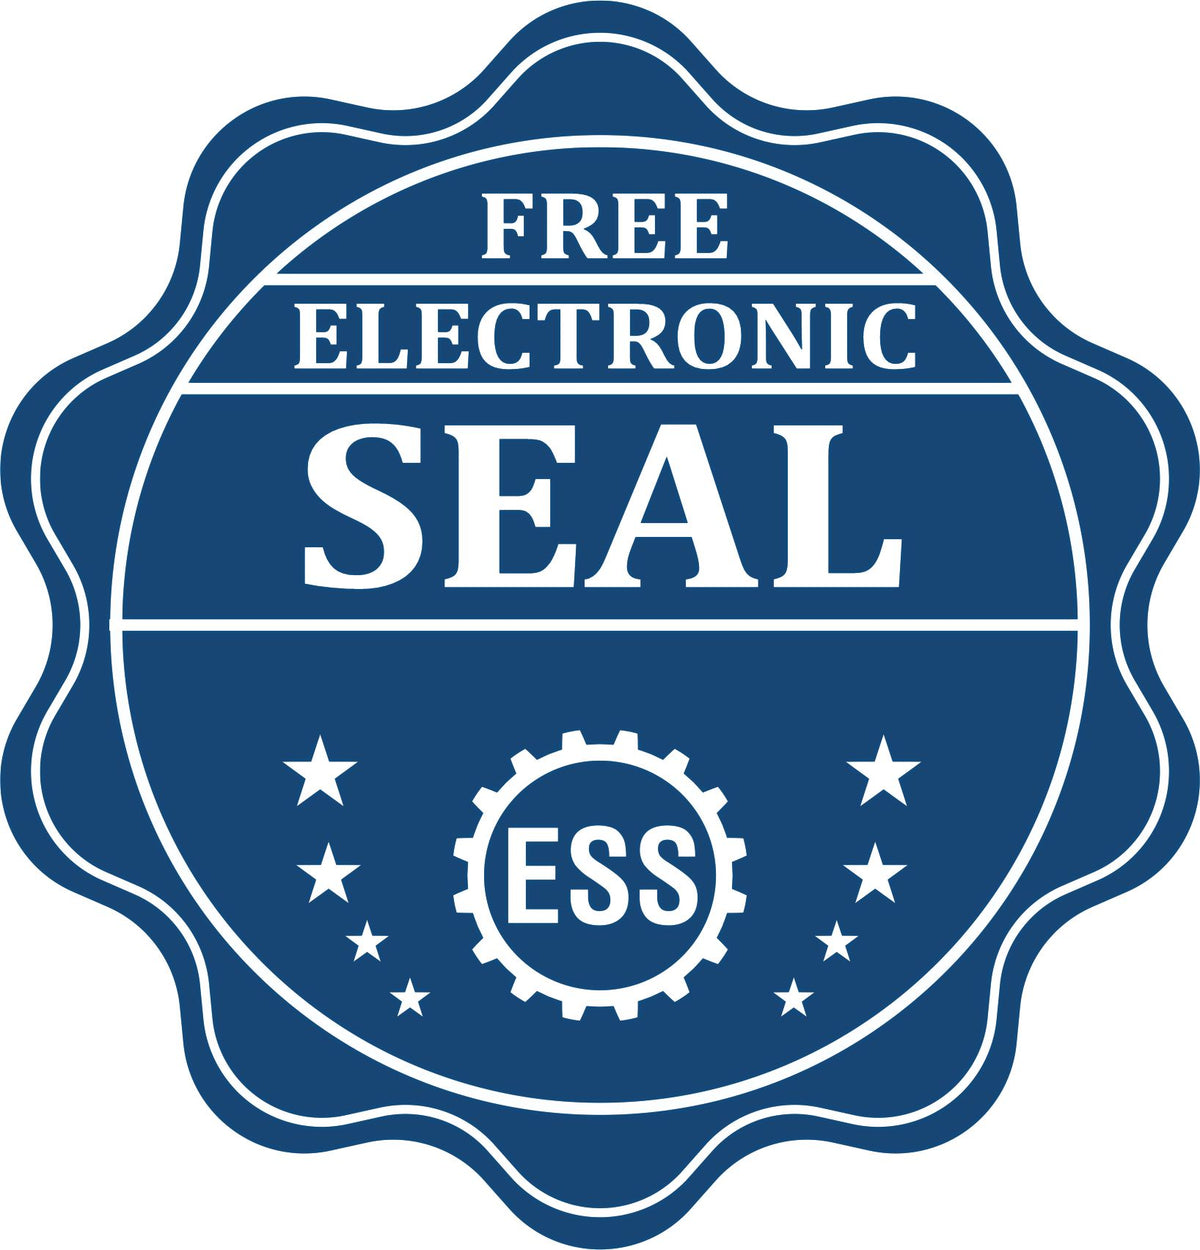 A badge showing a free electronic seal for the State of Iowa Soft Land Surveyor Embossing Seal with stars and the ESS gear on the emblem.